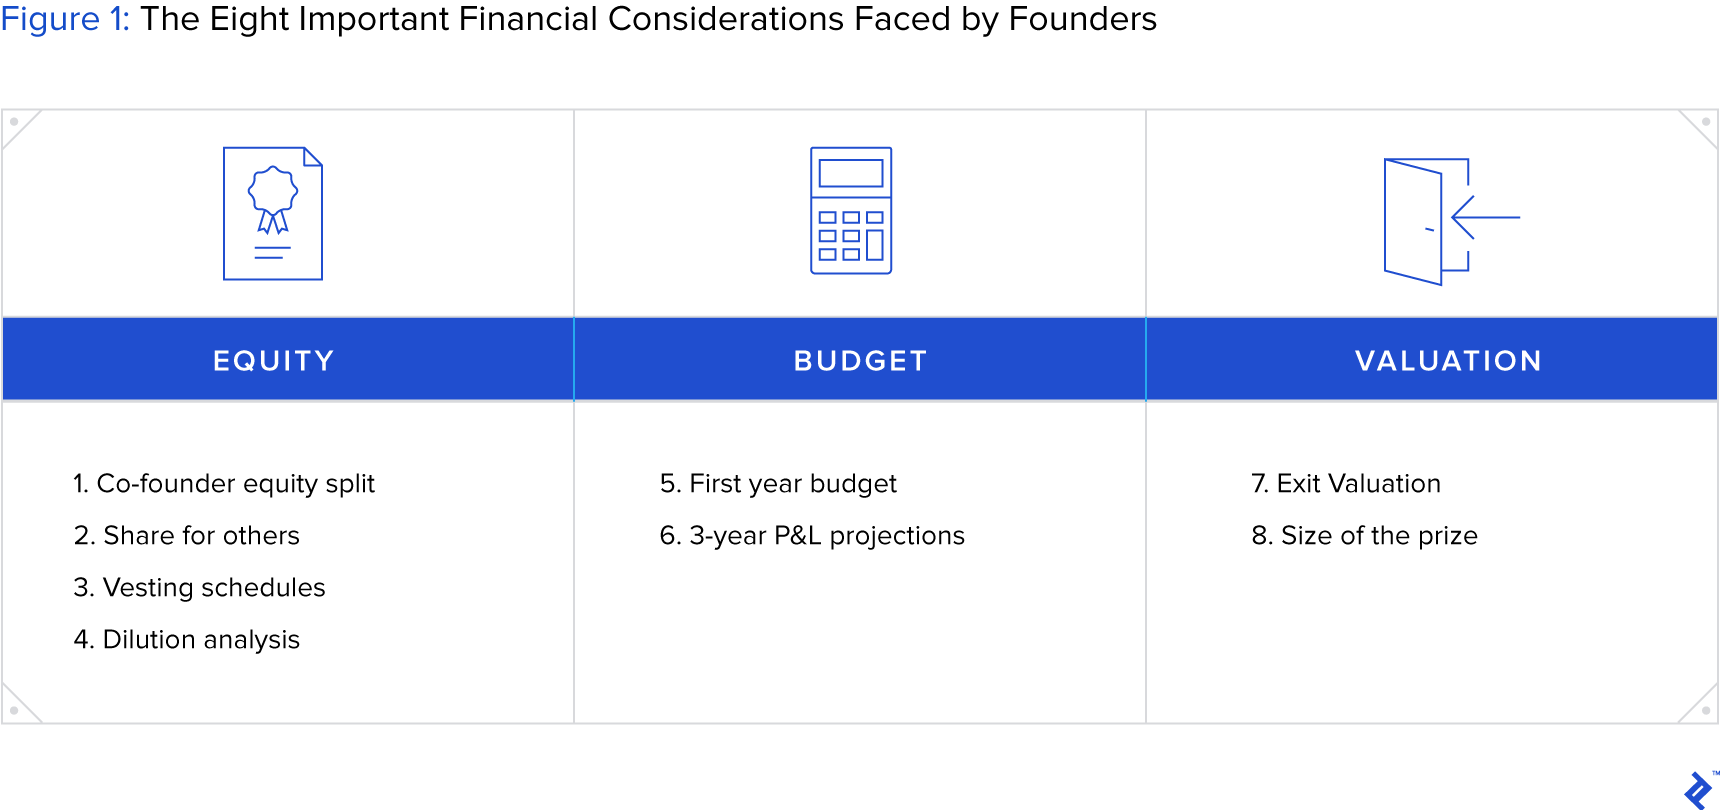 graphic representation of the eight important startup financing considerations faced by founders